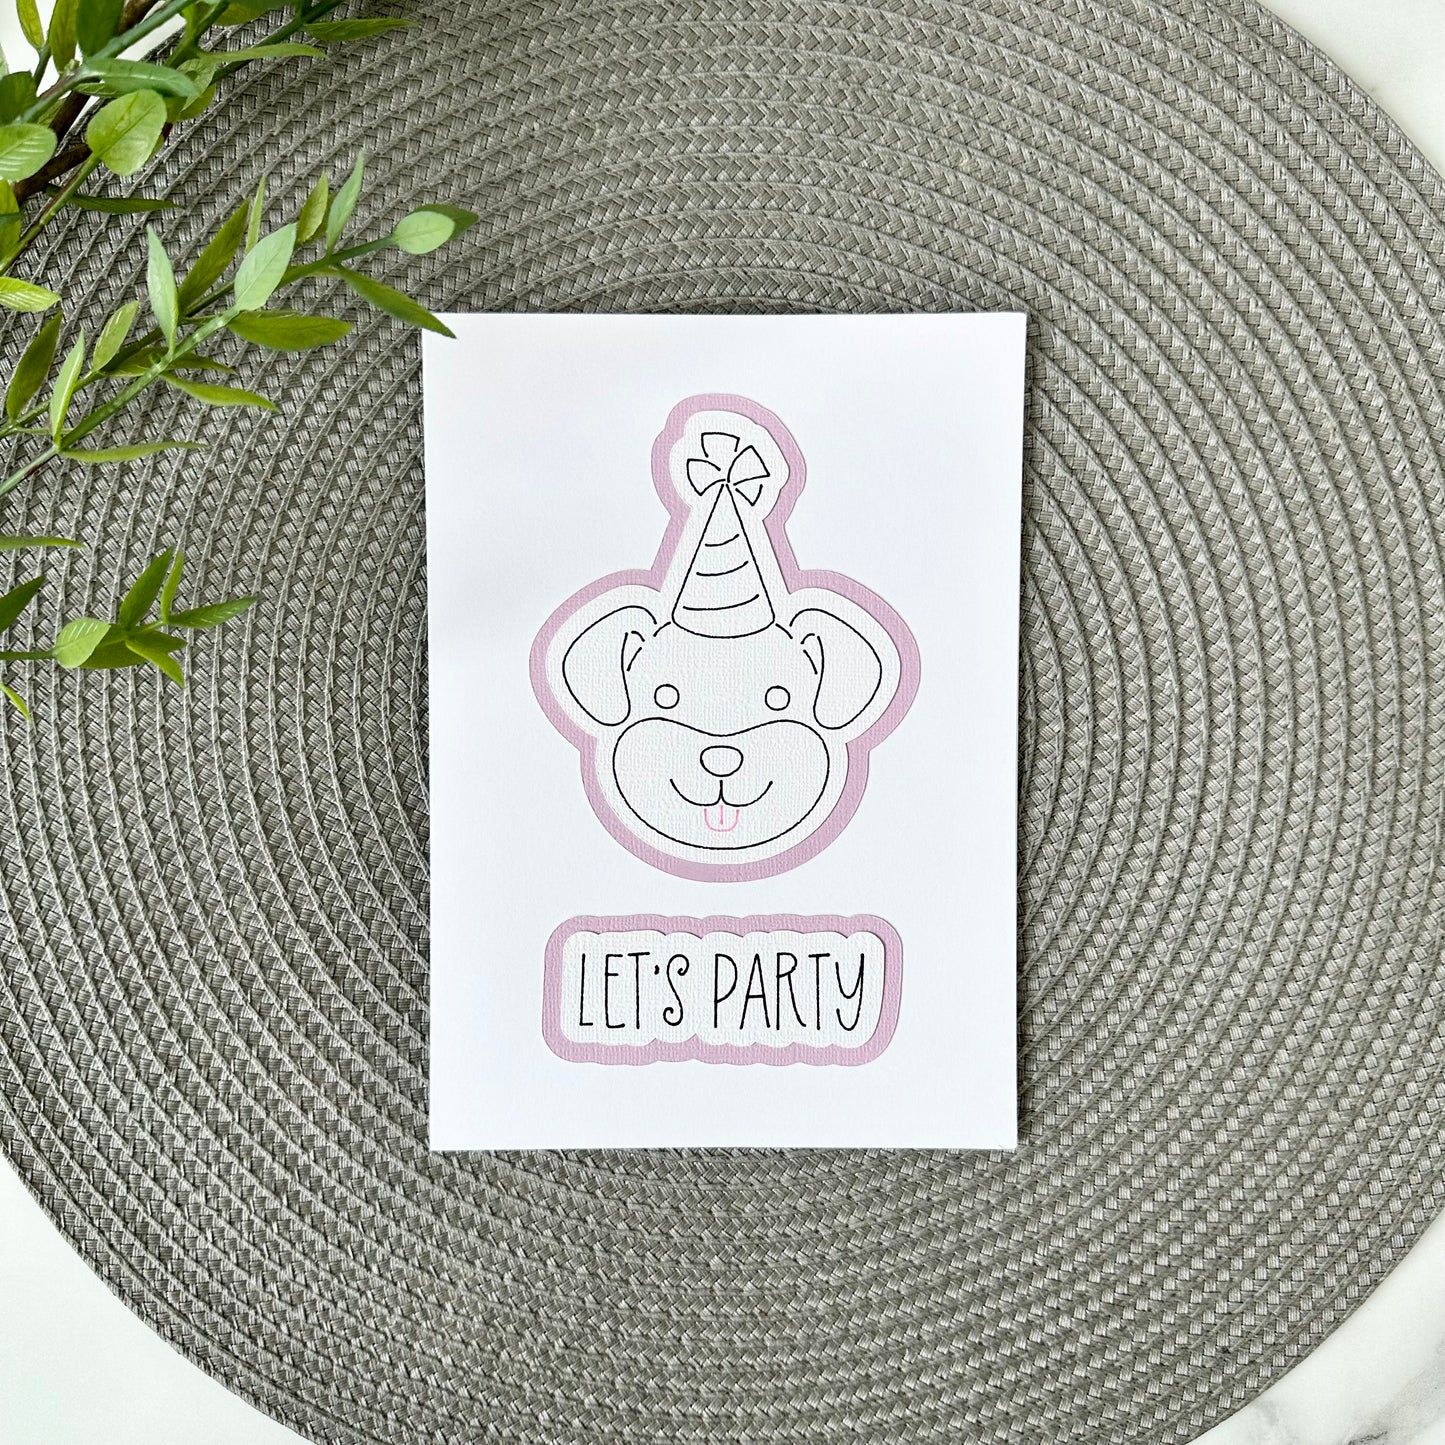 Let's Party Greeting Card - Dog